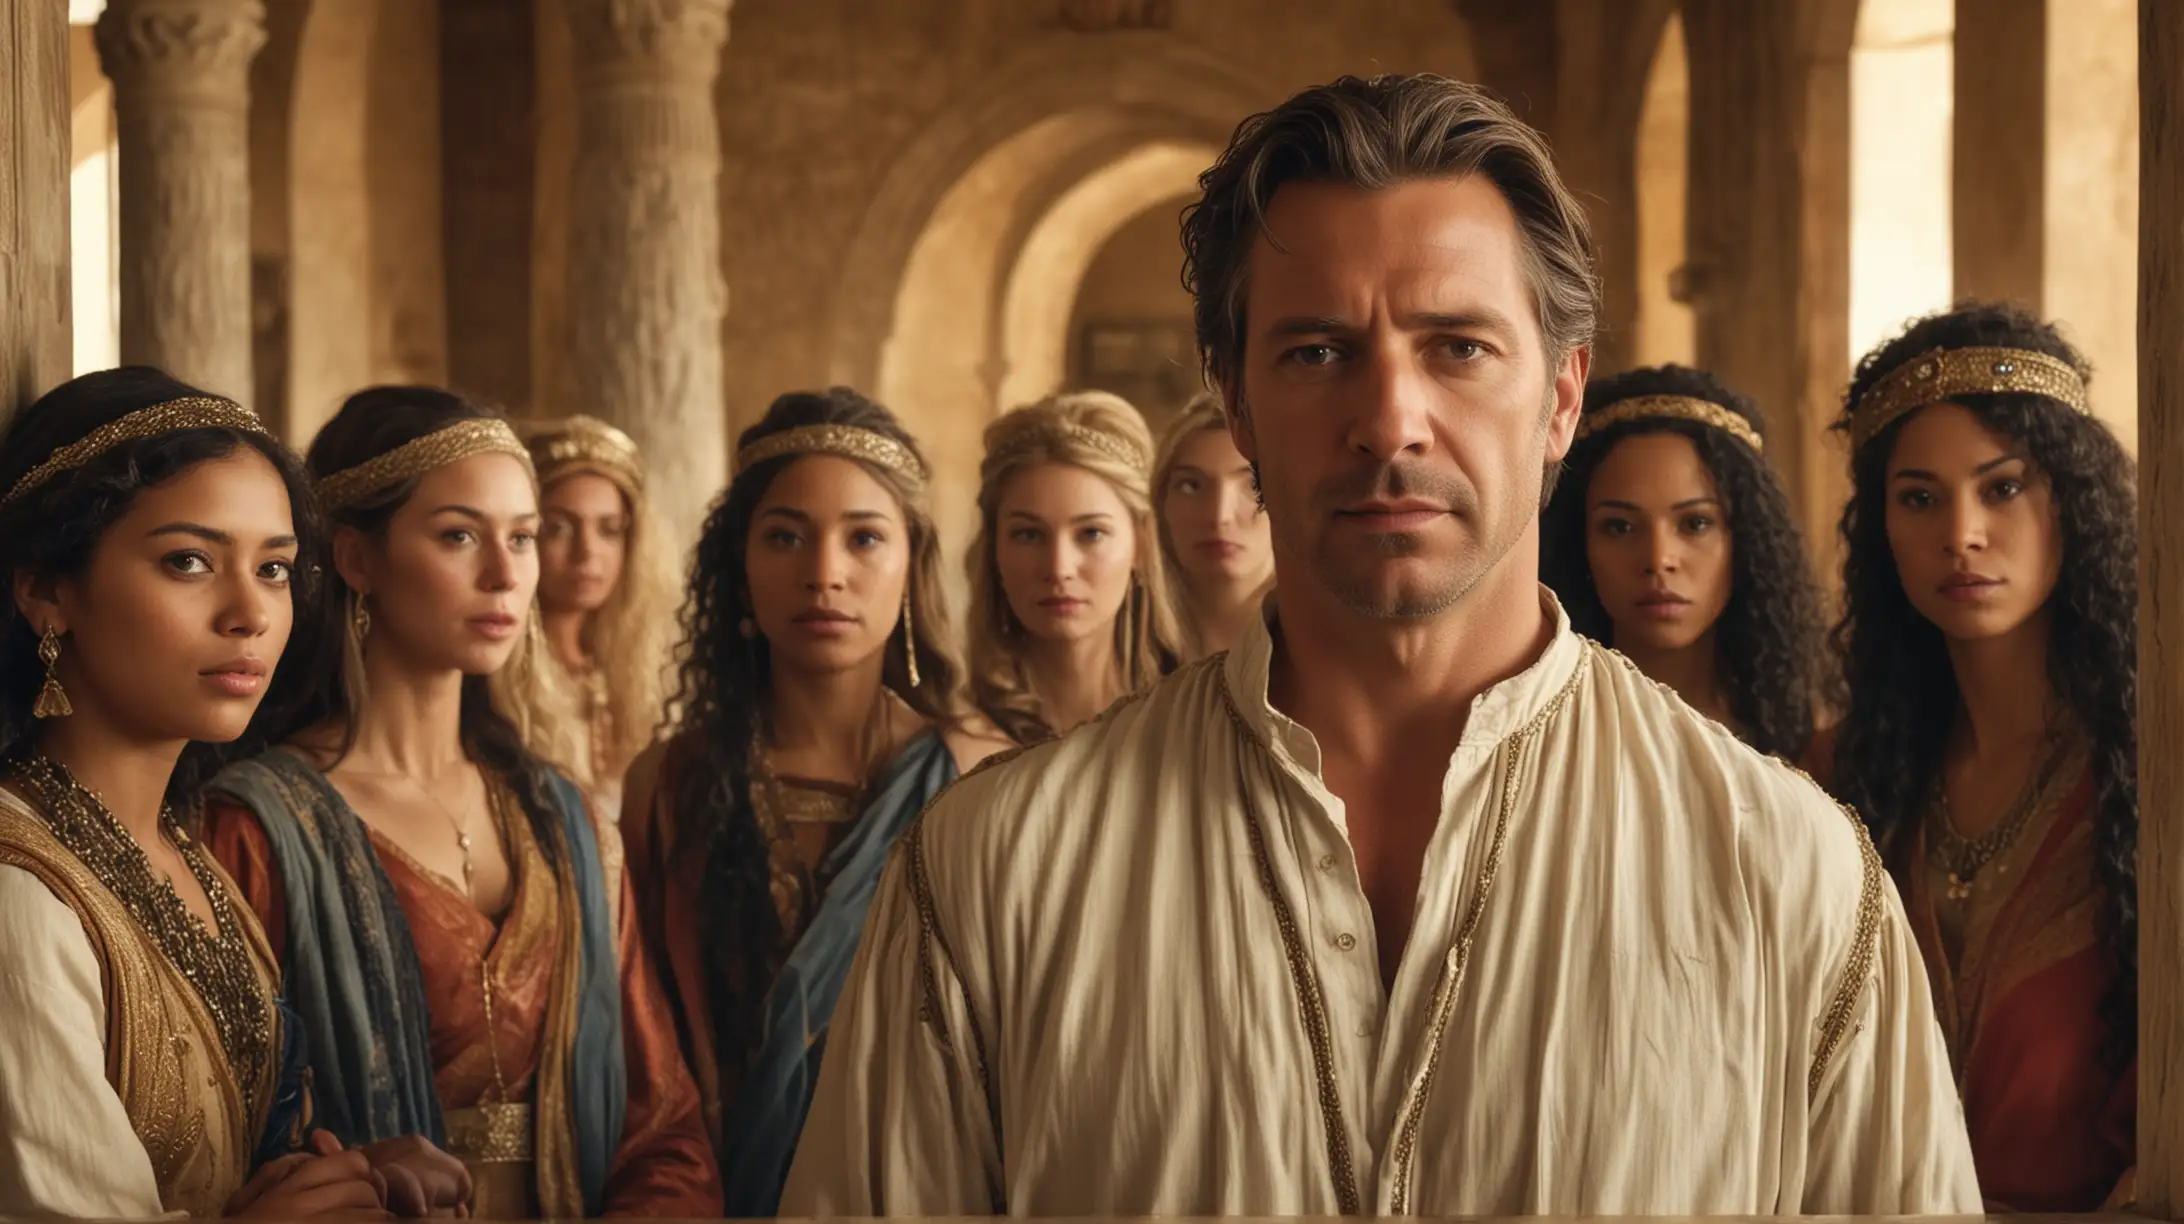 Middle Aged King Surrounded by Diverse Women in Biblical Palace Setting